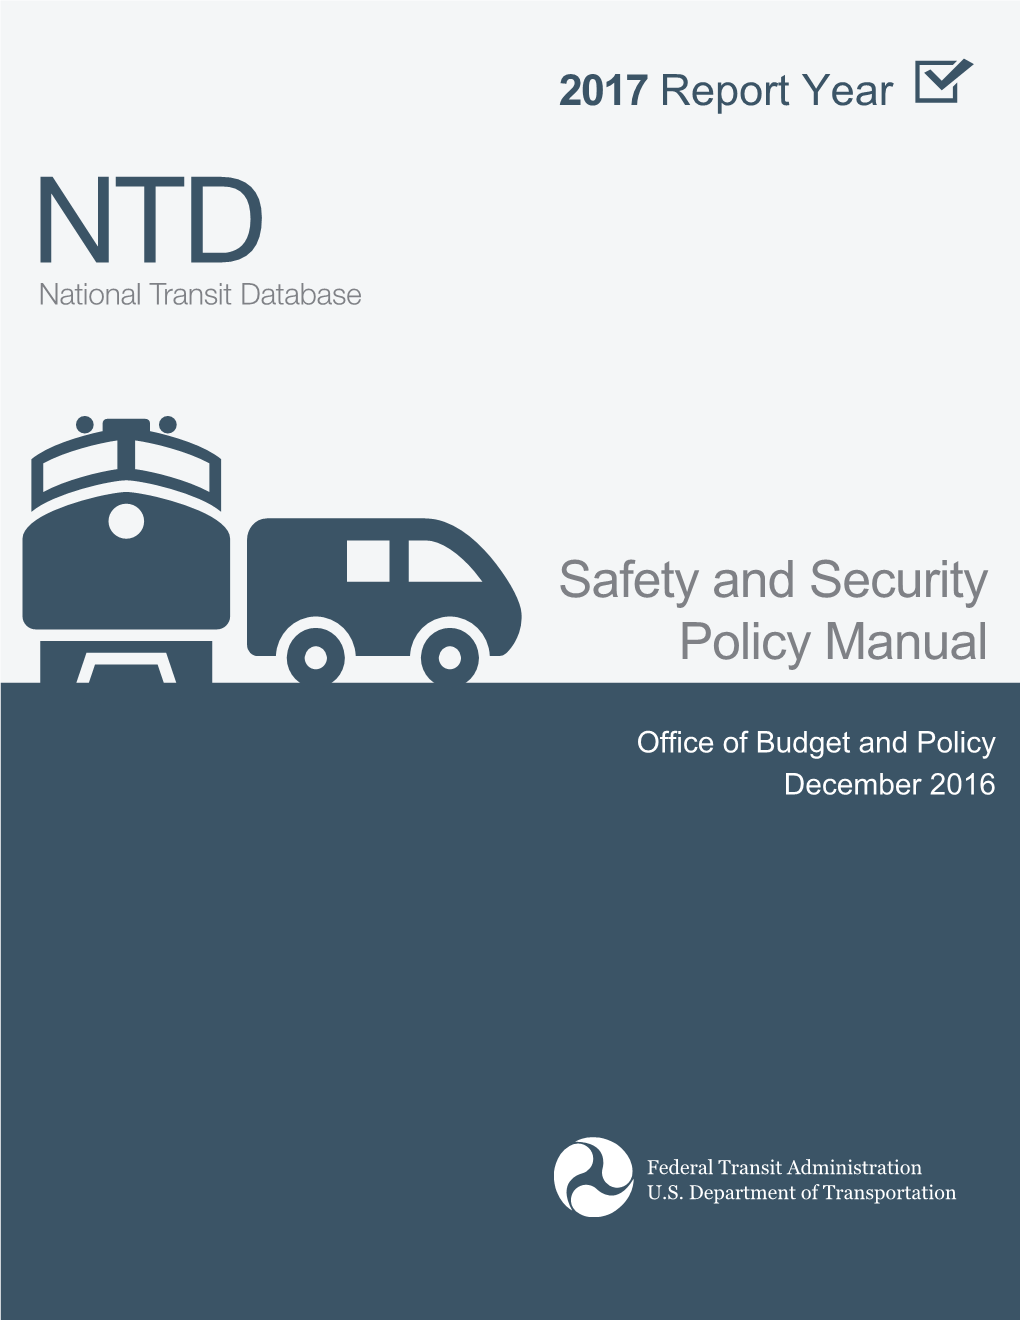 Safety and Security Policy Manual